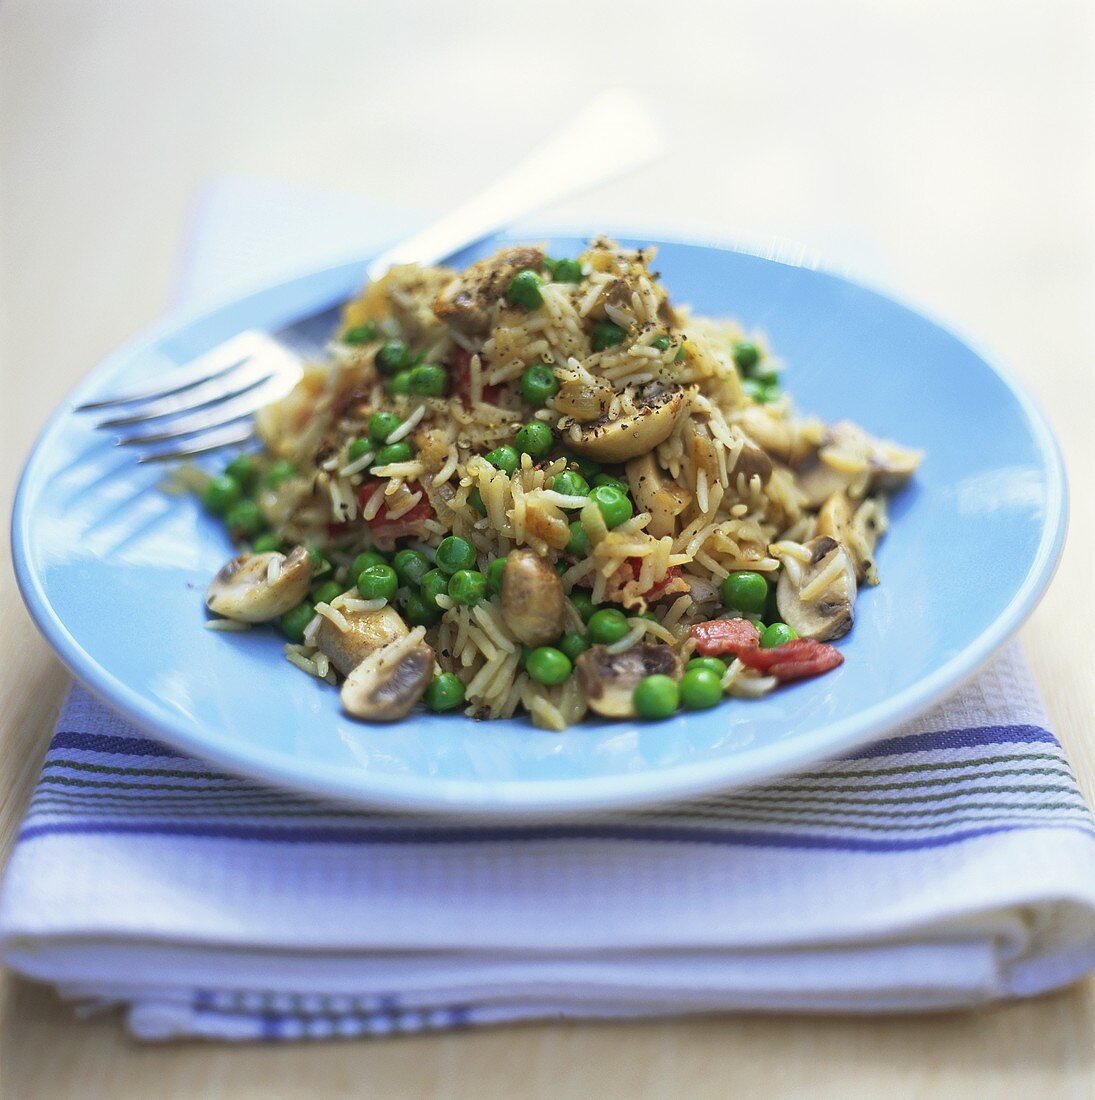 Fried rice with mushrooms and peas